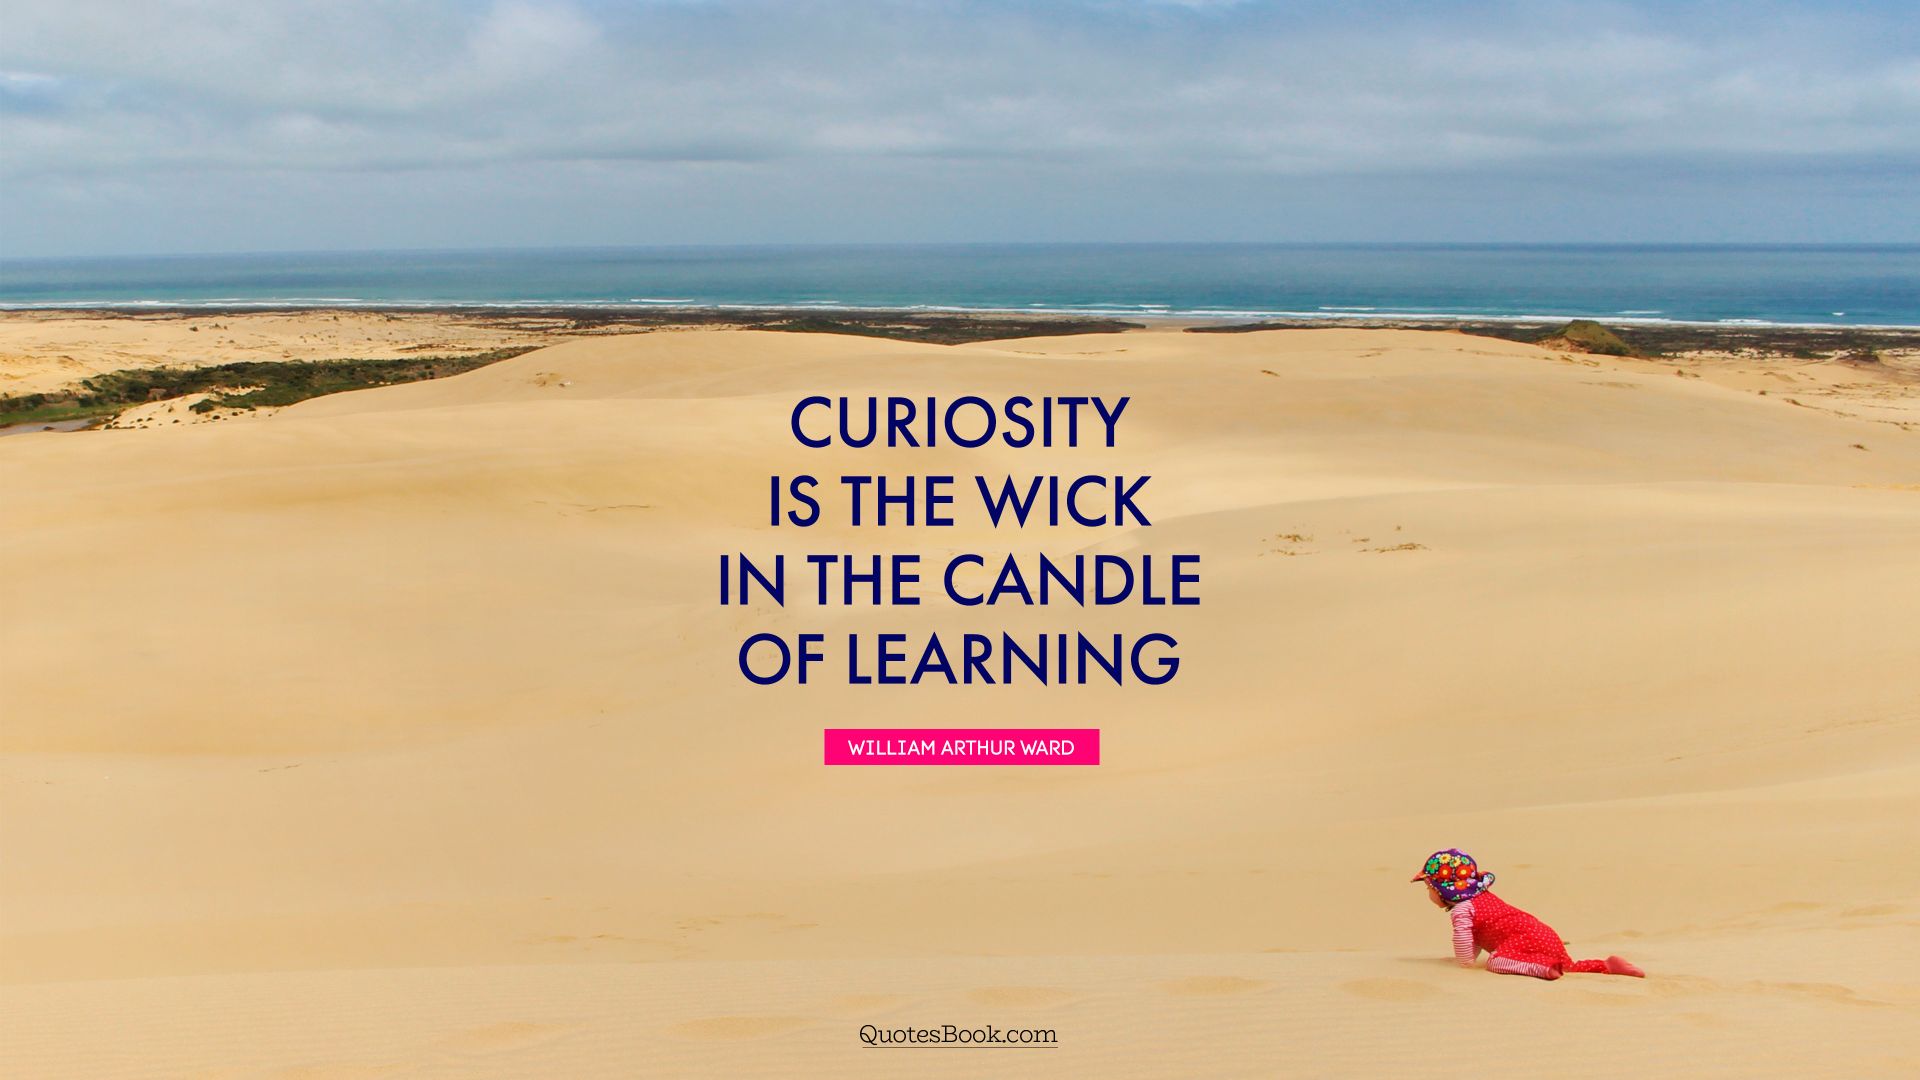 Curiosity is the wick in the candle of learning. - Quote by William Arthur Ward